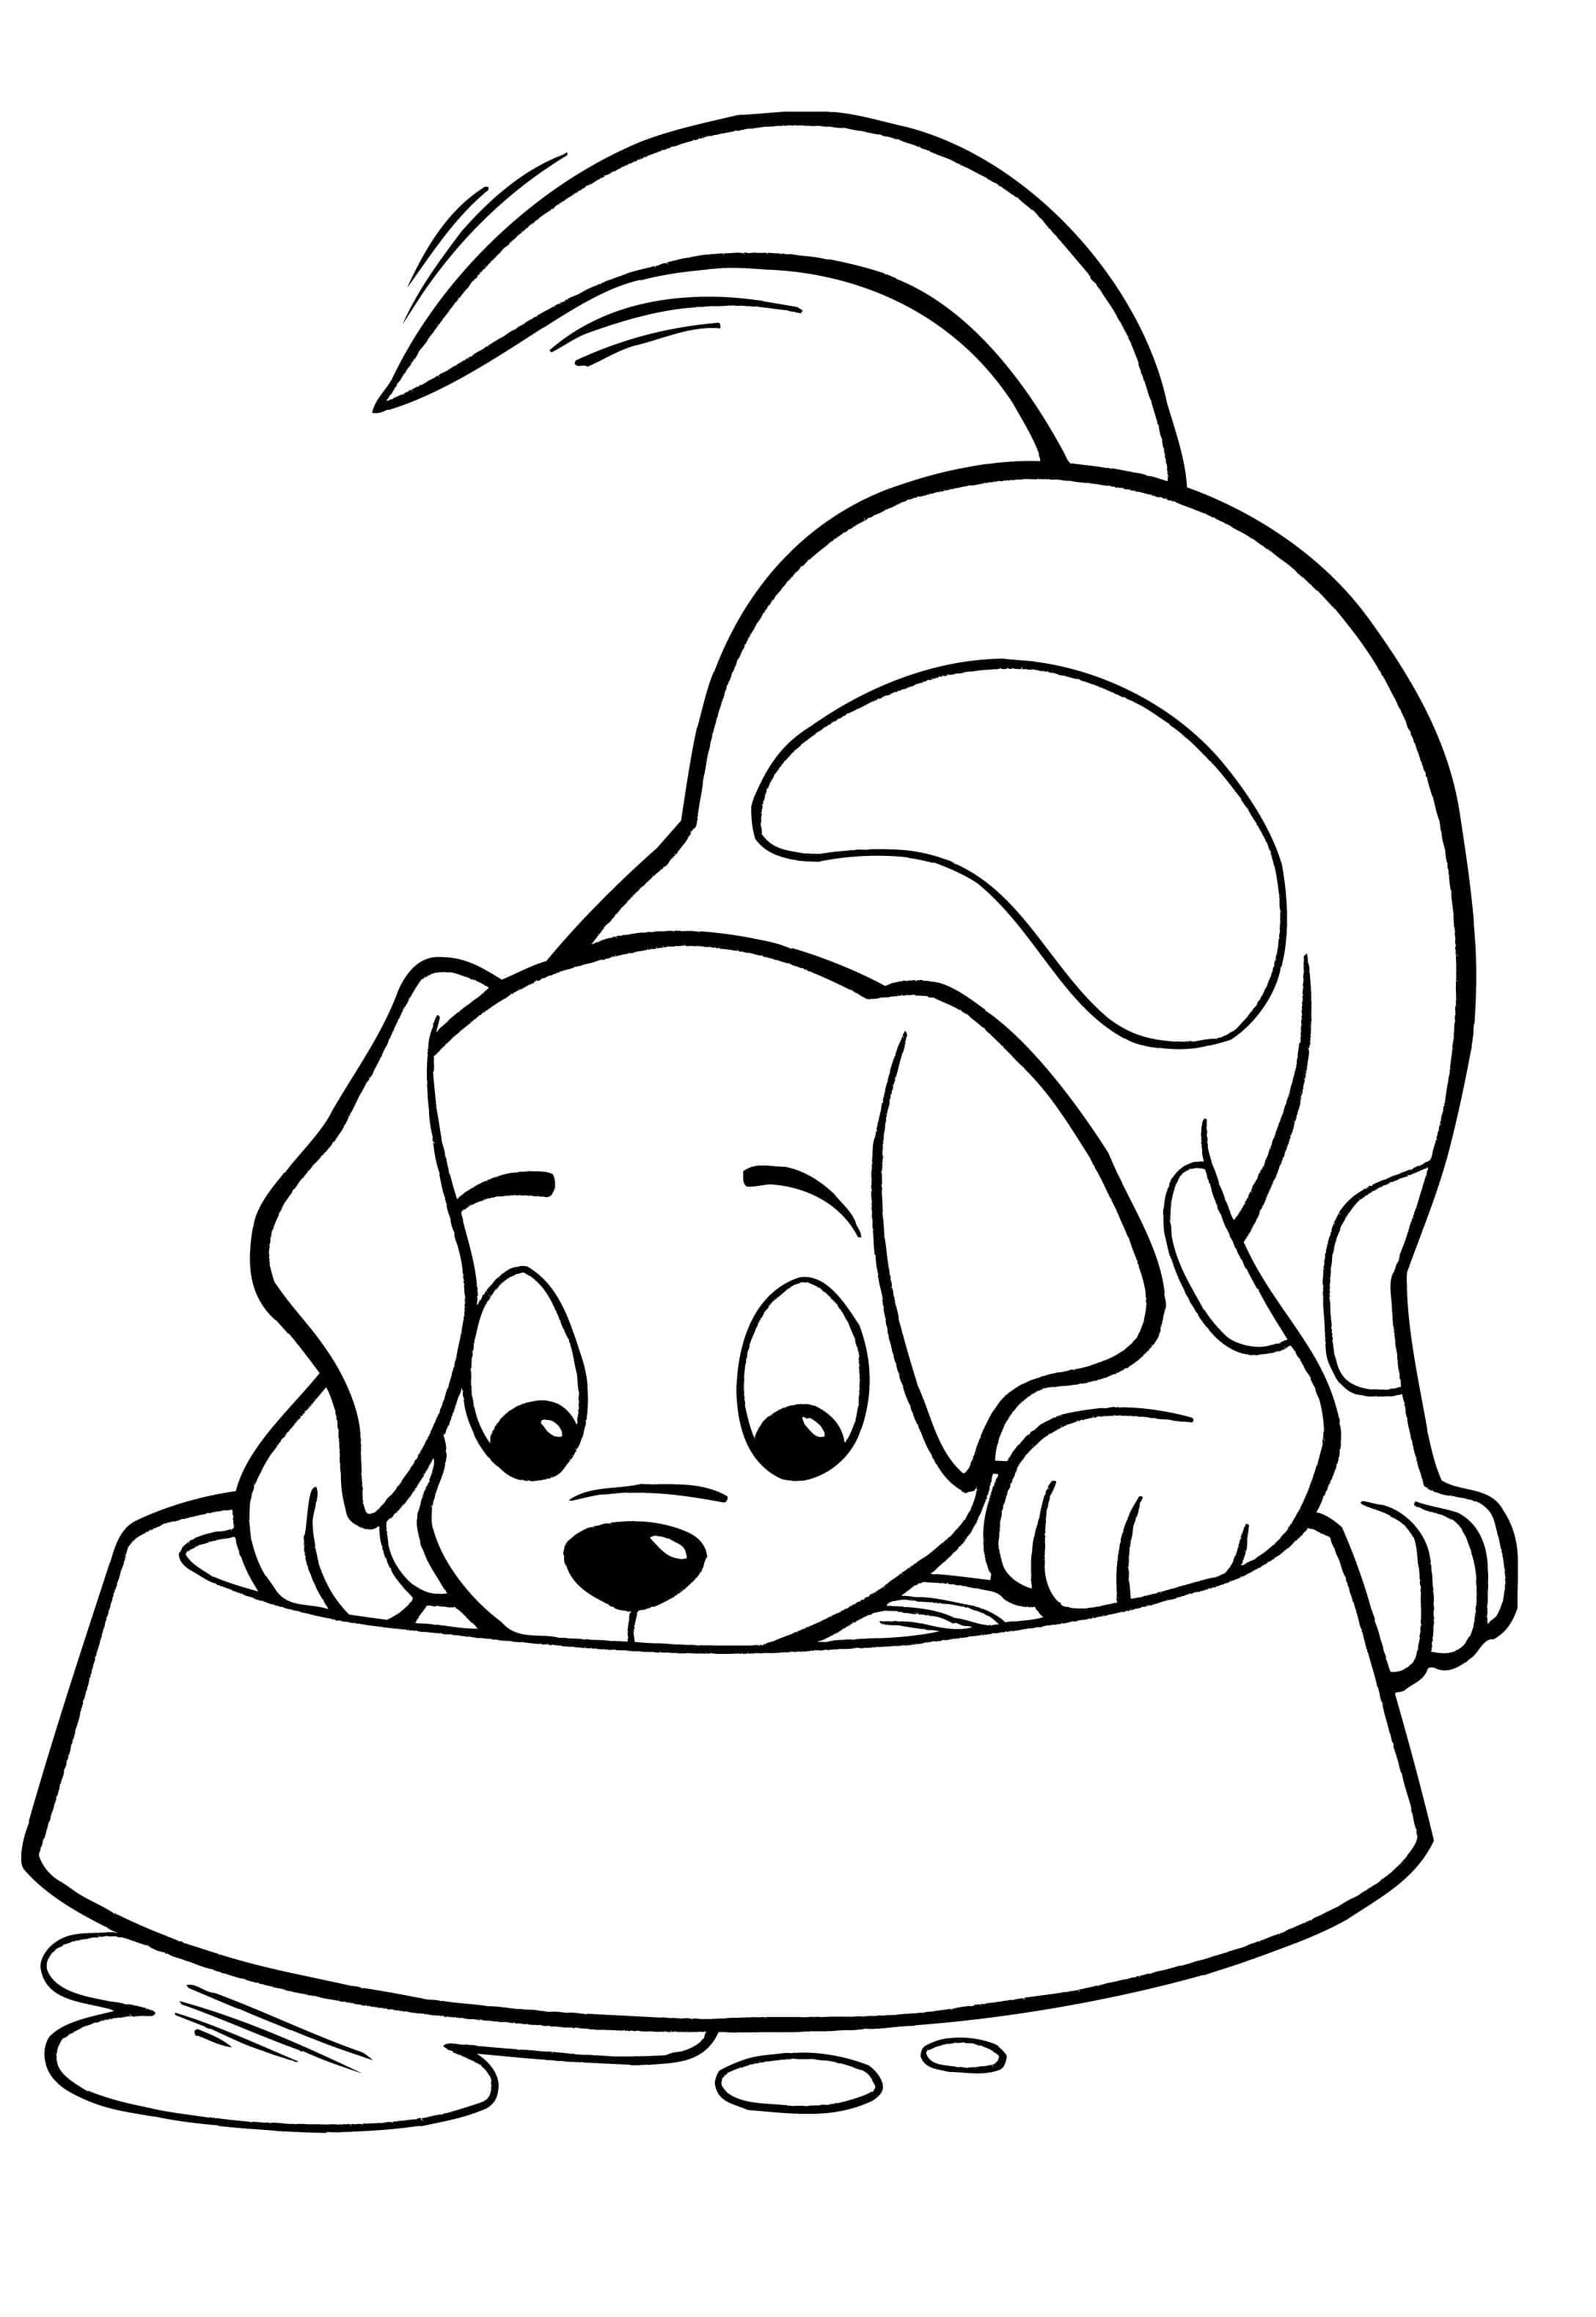 Dog Coloring Pages for Kids. Print Them Online for Free